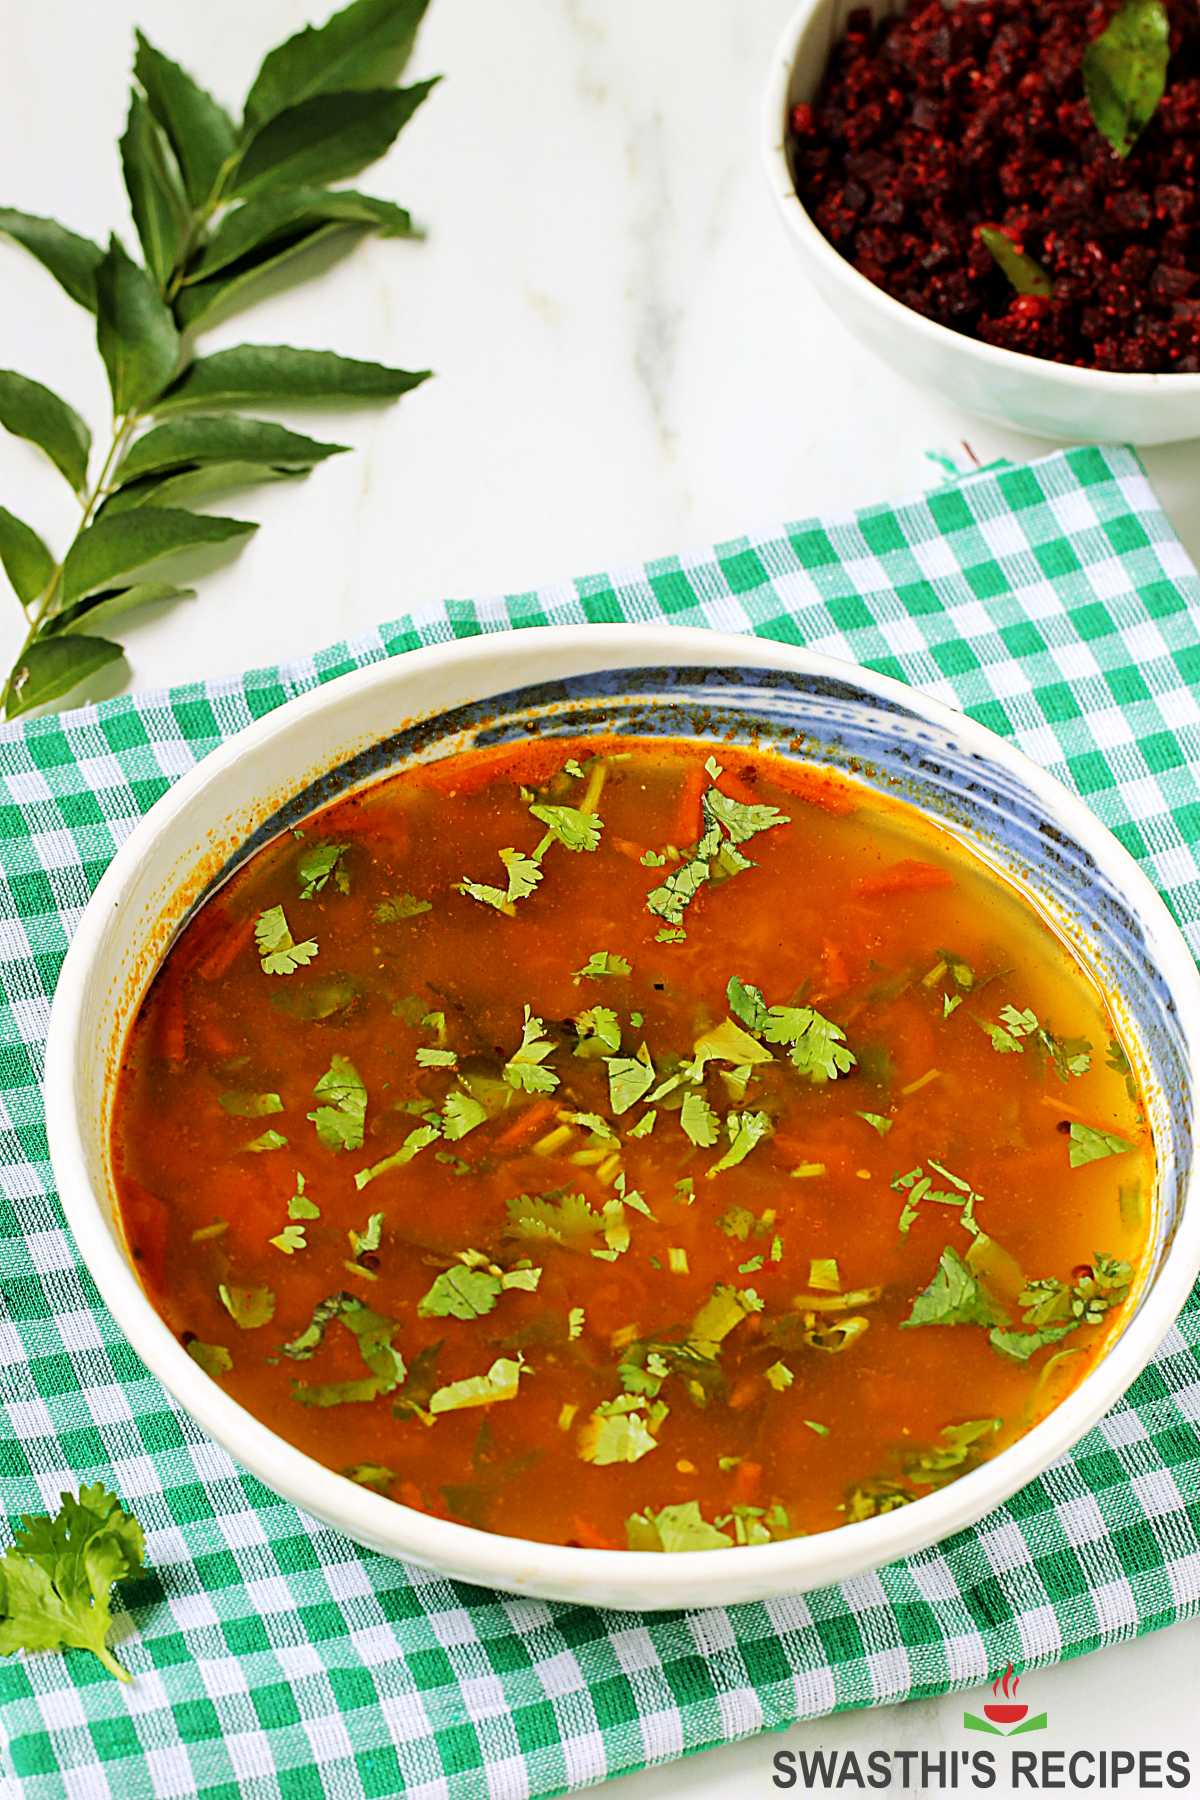 Rasam made in South Indian restaurant style